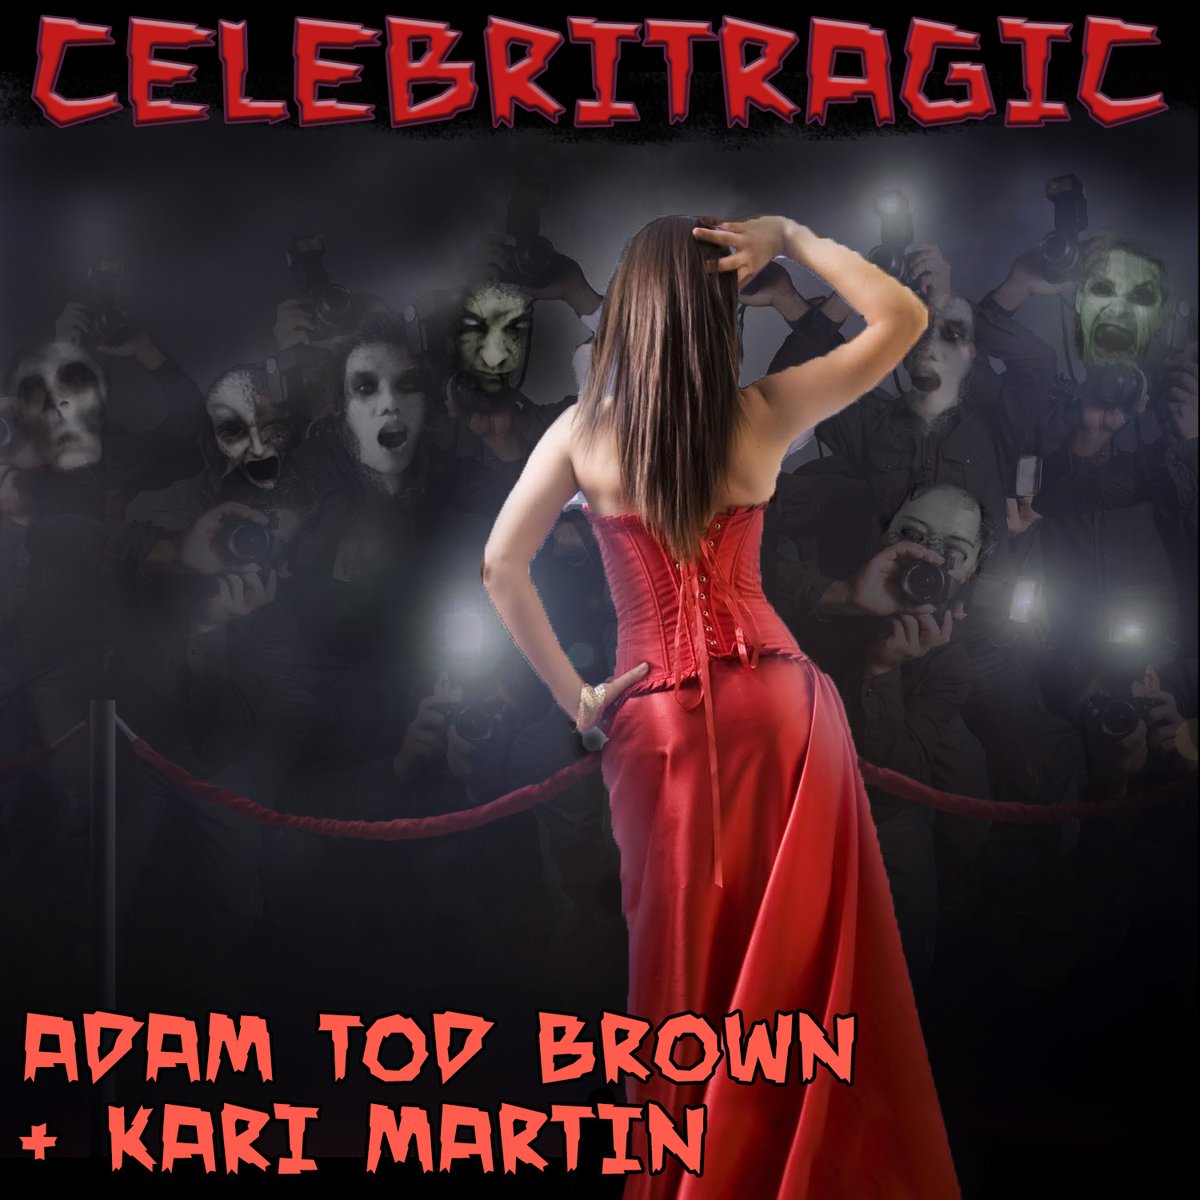 This week on Celebritragic, @adamtodbrown and @karimartin722 talk about unsolved celebrity murders! Subscribe to listen at patreon.com/unpops and unpopsnetwork.supercast.tech !!!